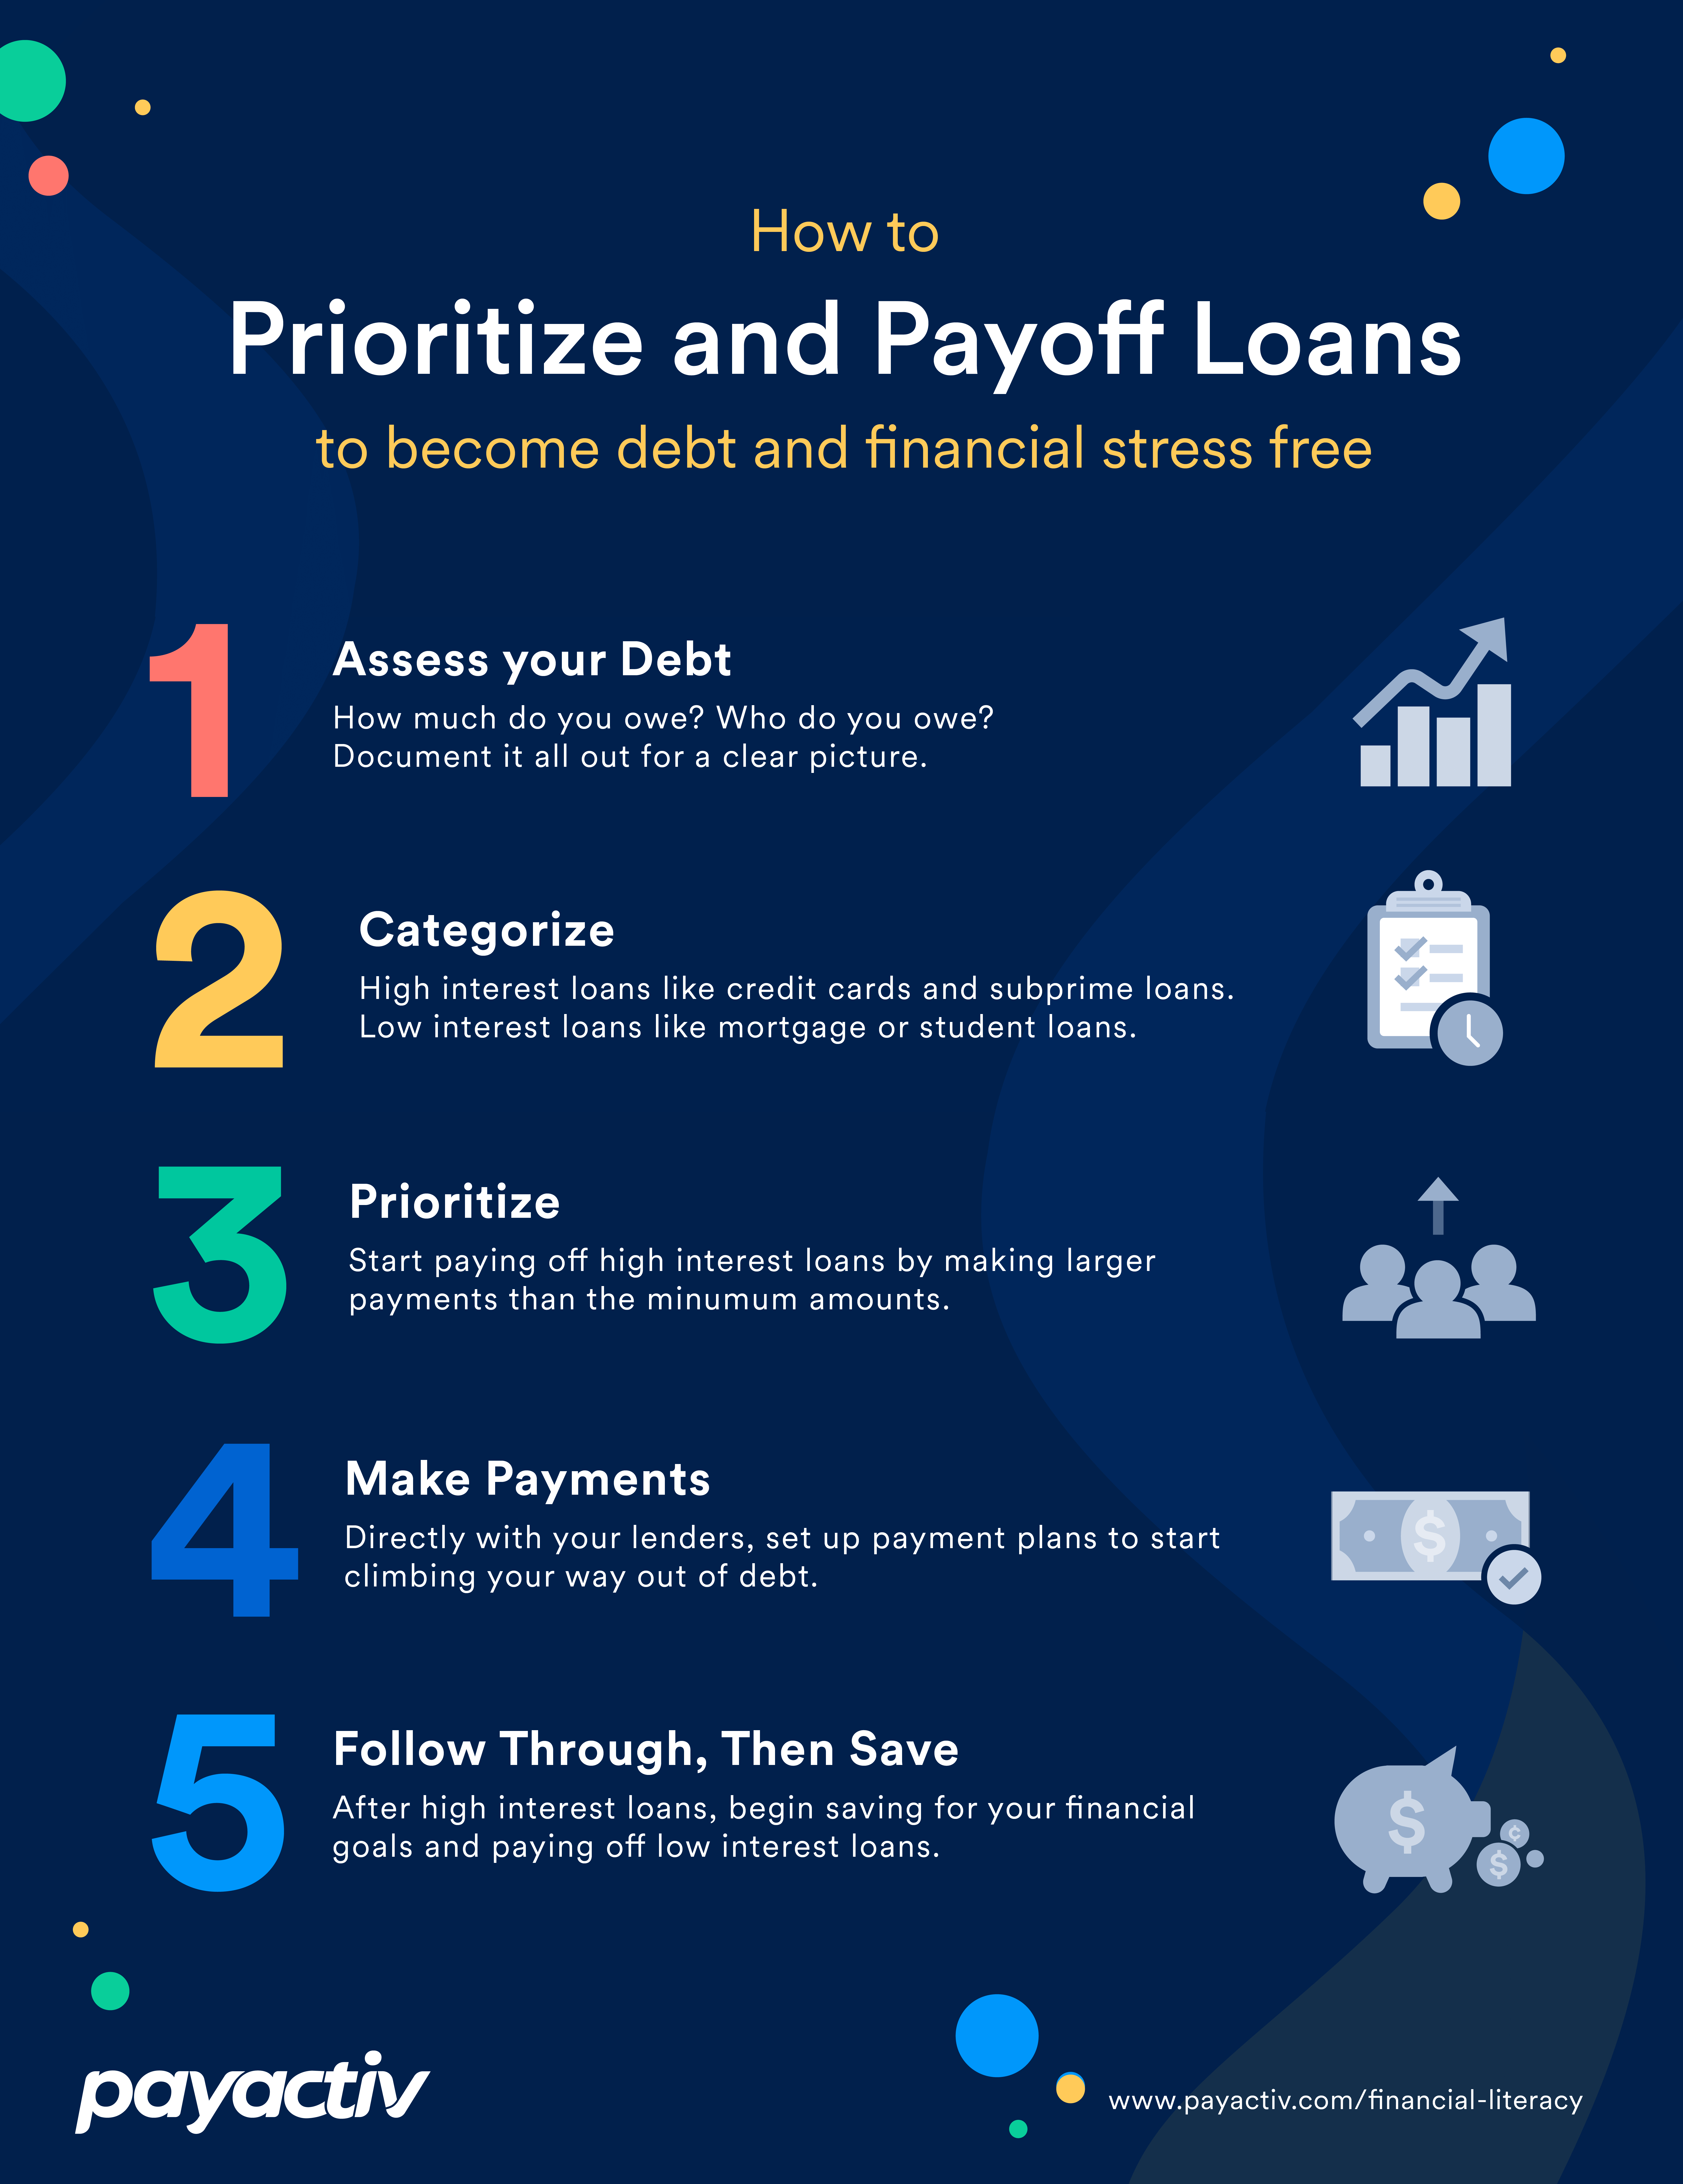 Prioritize and Payoff Loans